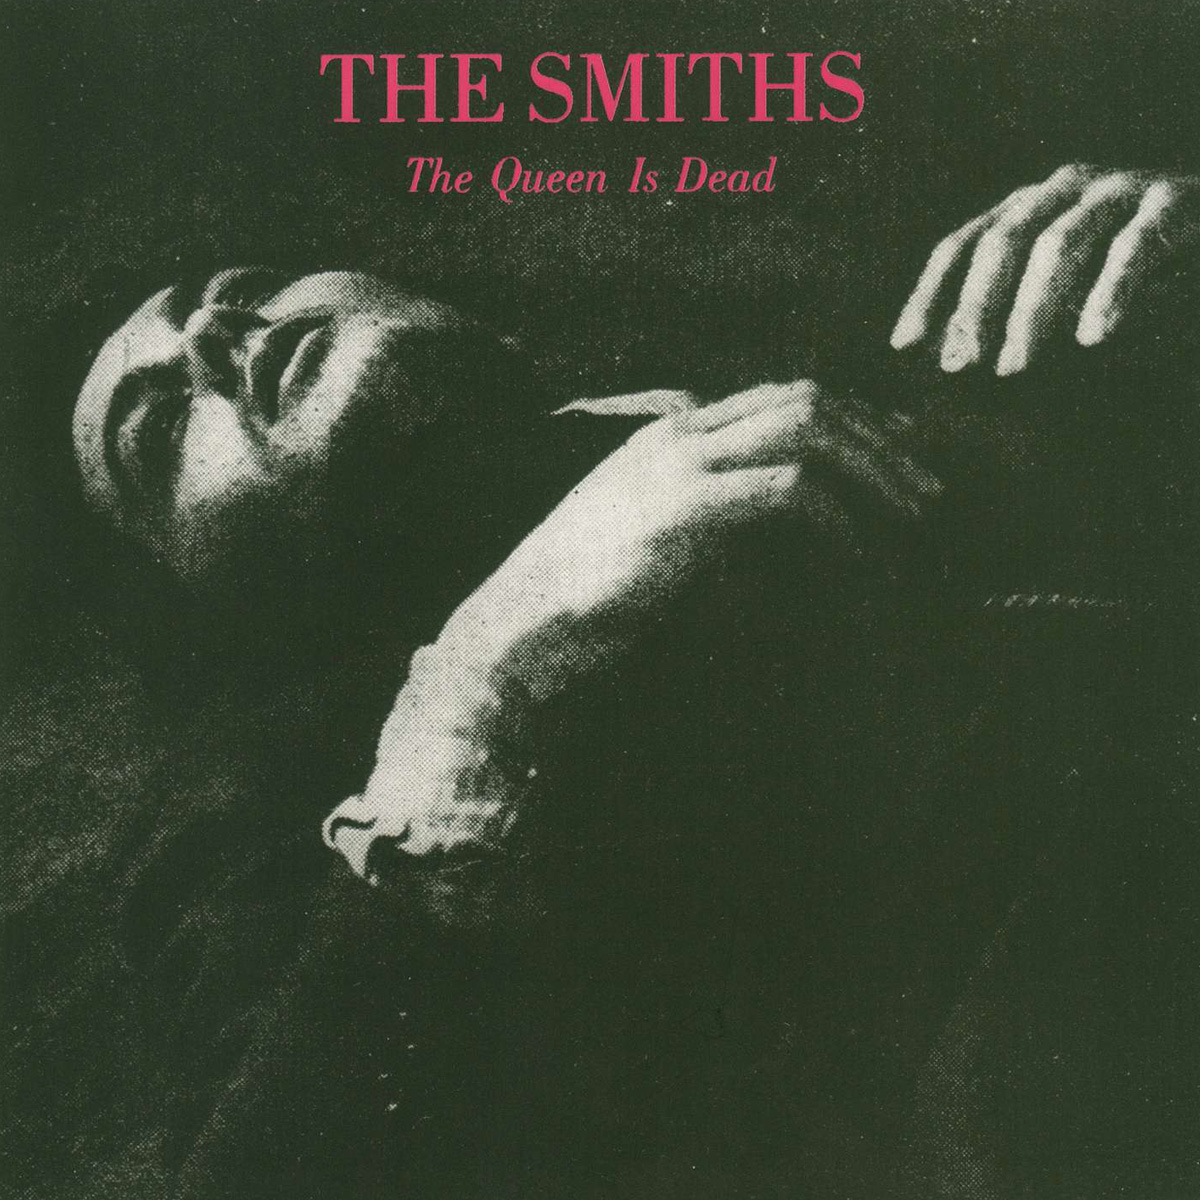 The Queen is Dead Musical album – The Smiths